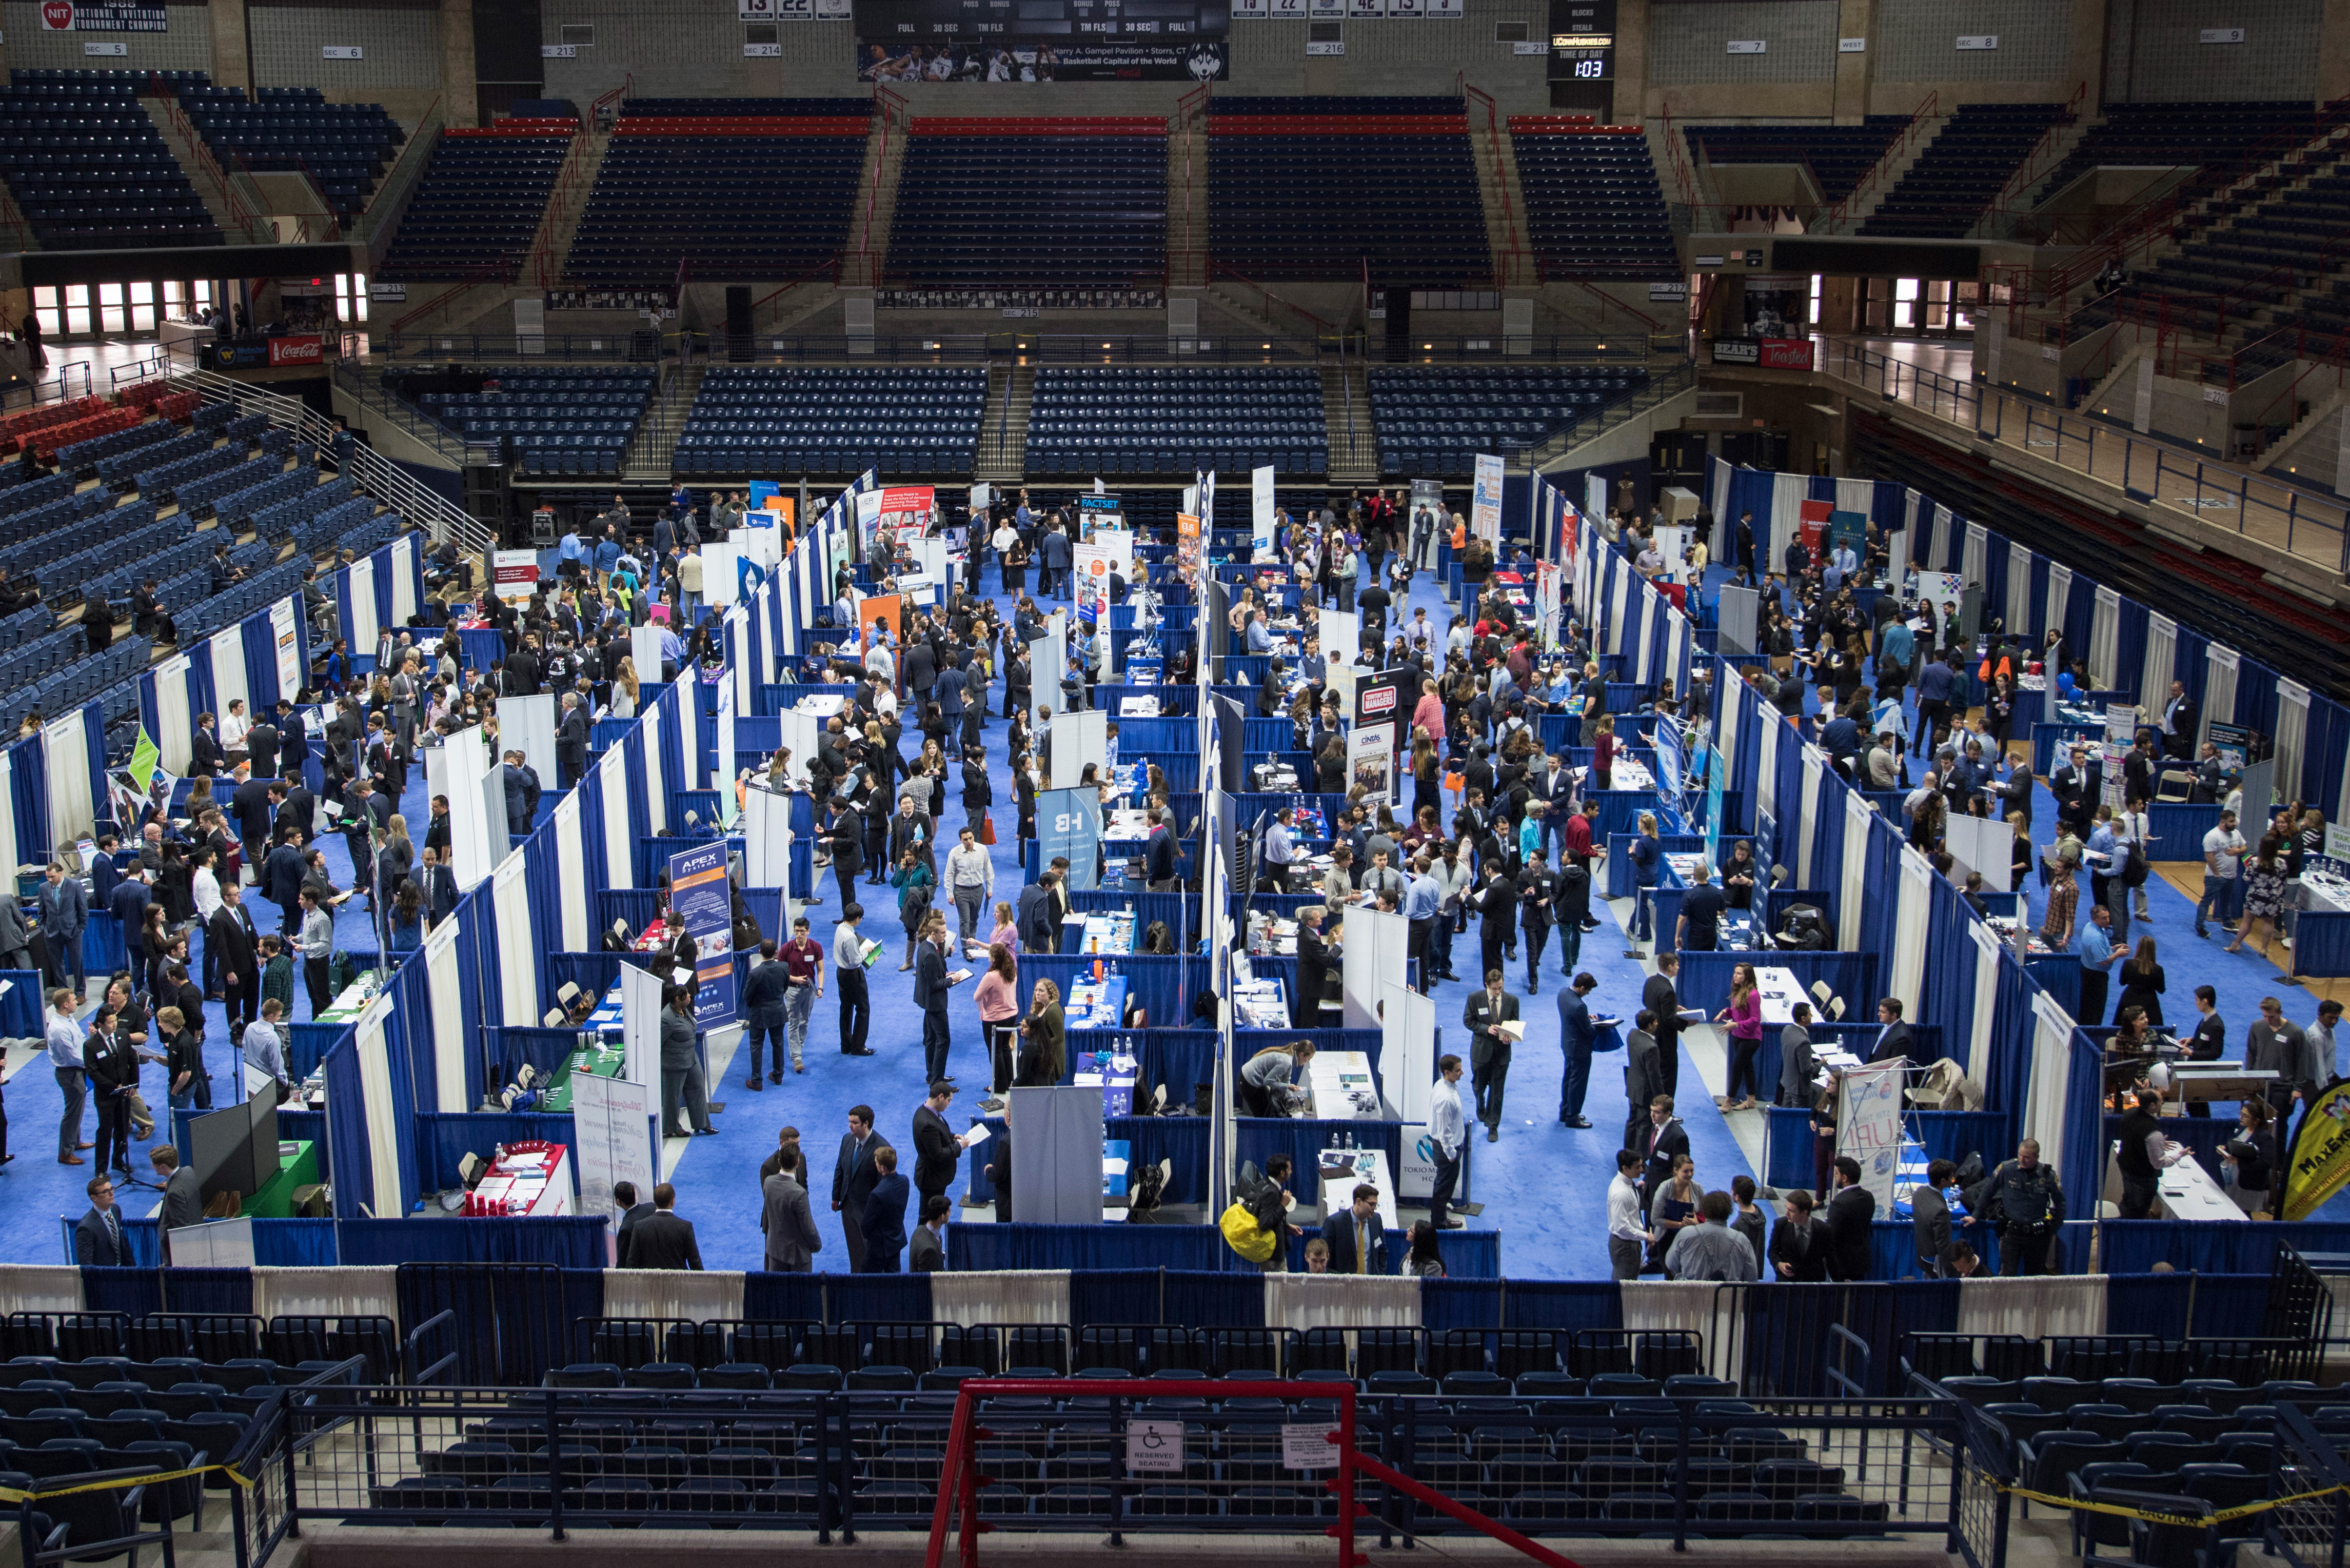 Students attend the 2017 Spring Career Fair in the Gampel Pavilion on Jan. 29, 2017. (Ryan Glista/UConn Photo)